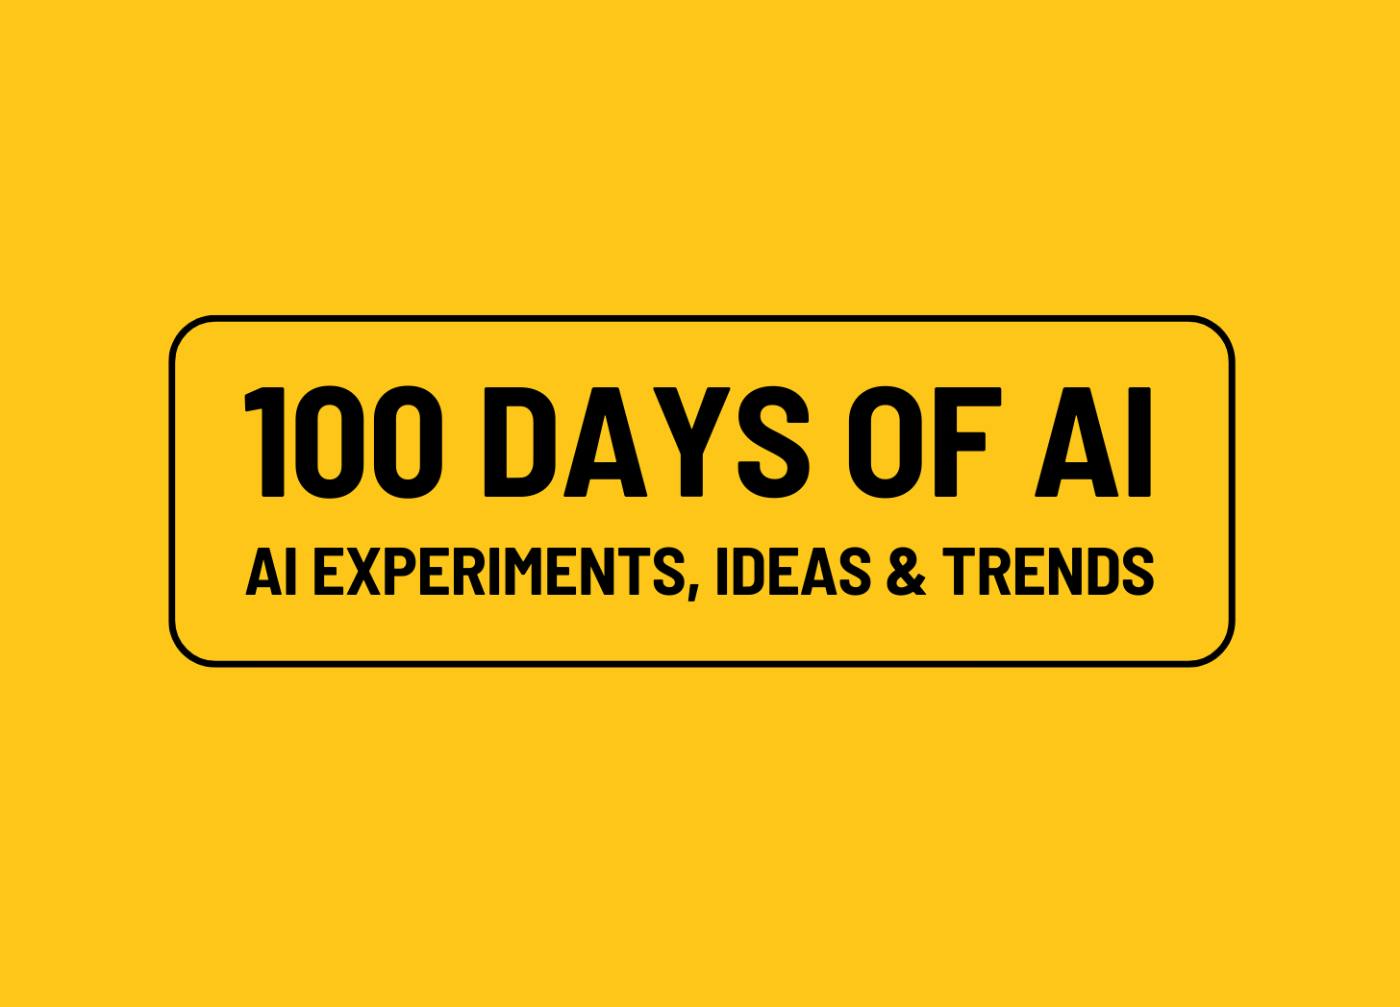 https://cdn.aisys.pro/stories/100-days-of-ai-day-11-becoming-a-finetuning-wizard-in-gen-ai-applications.jpg